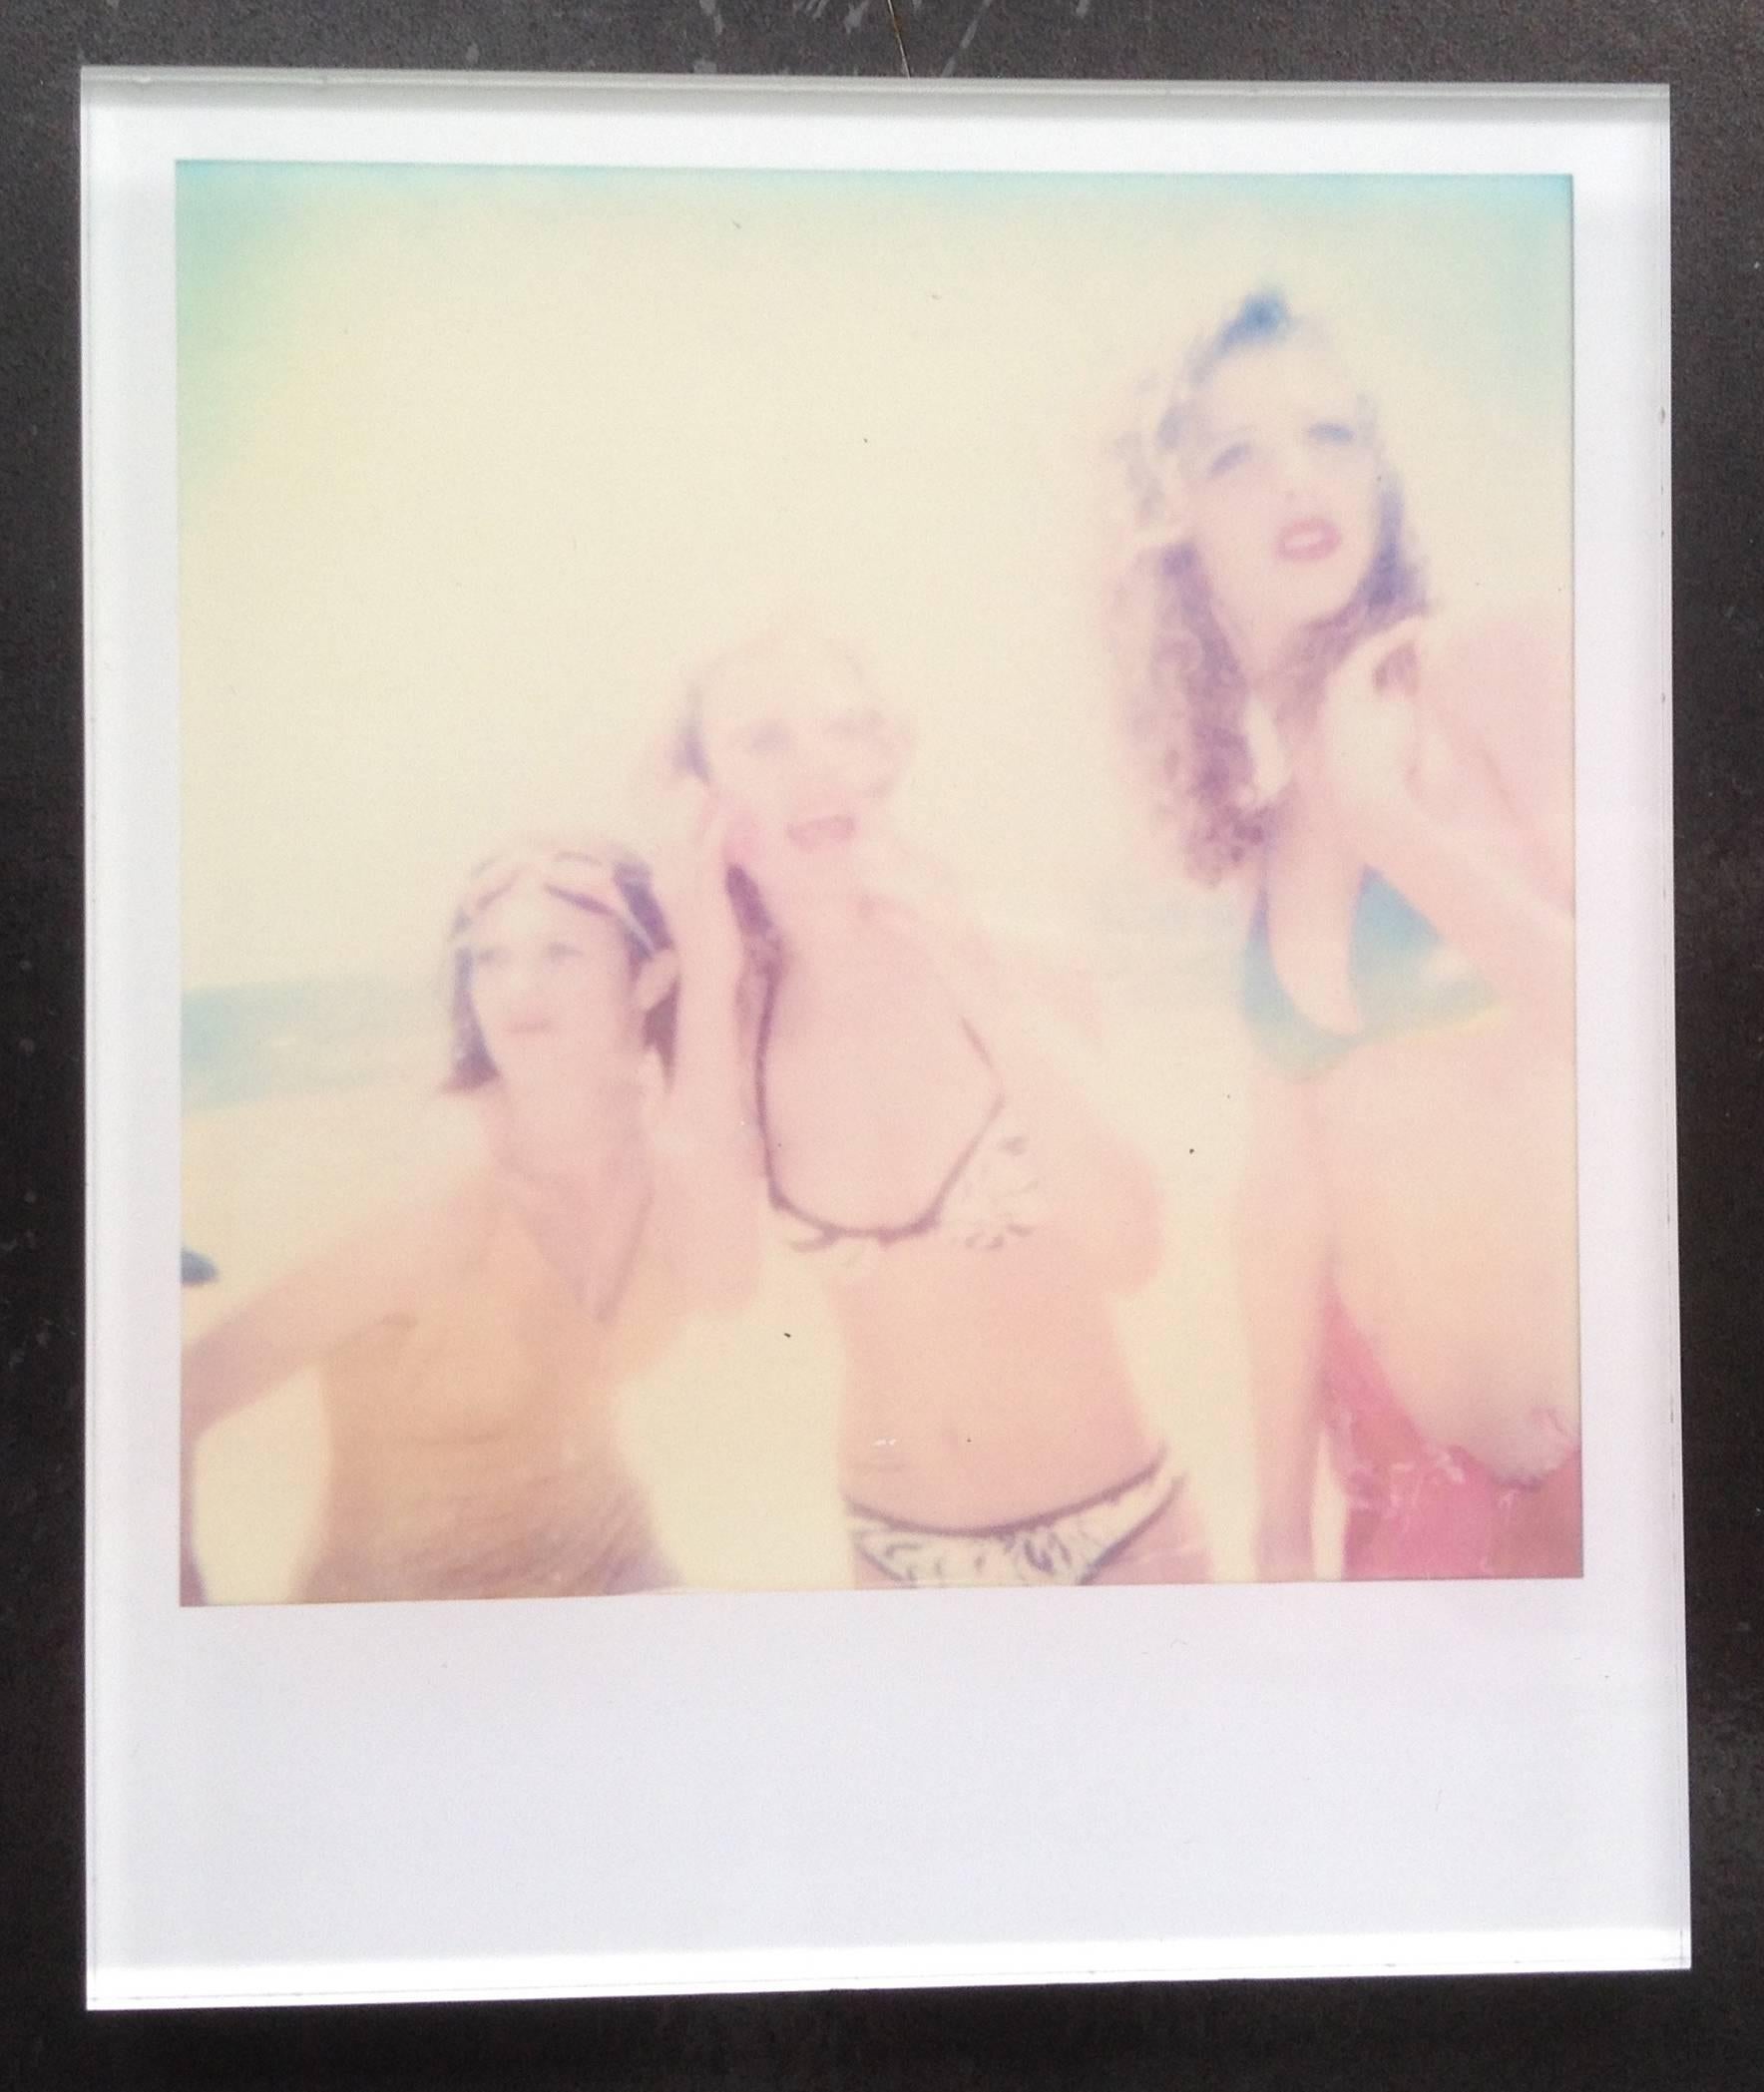 Stefanie Schneider's Minis
'Untitled #2' (Beachshoot) featuring Radha Mitchell, 2005
signed and signature brand on verso
Lambda digital Color Photographs based on a Stefanie Schneider expired Polaroid photograph.

Polaroid sized open Editions